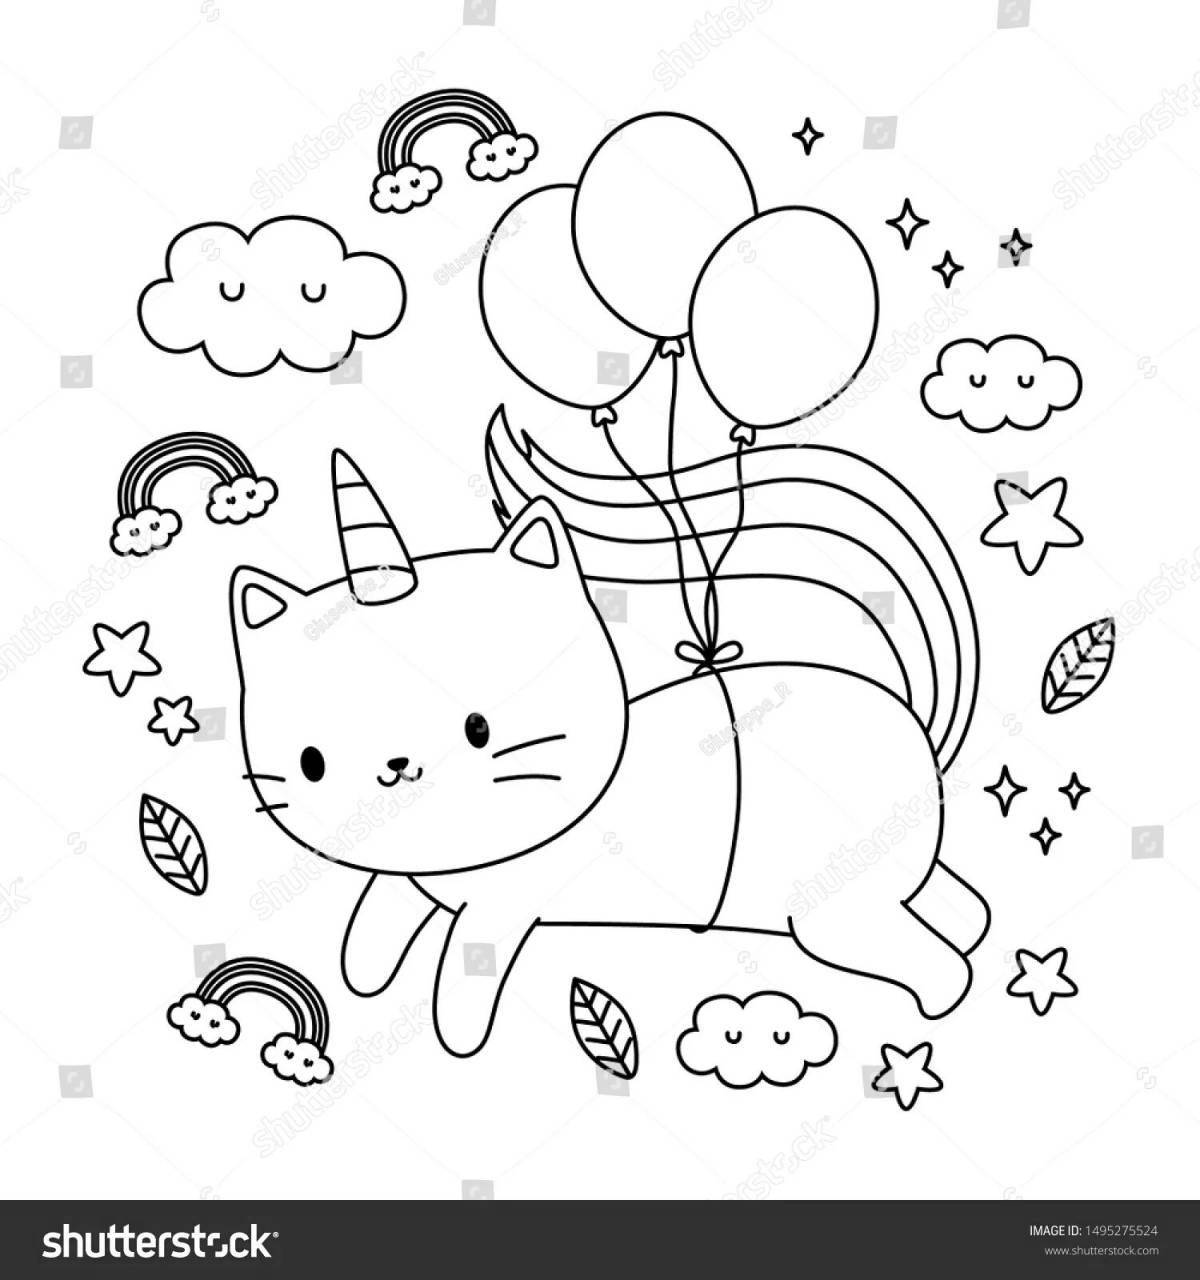 Felicity funny cat coloring page